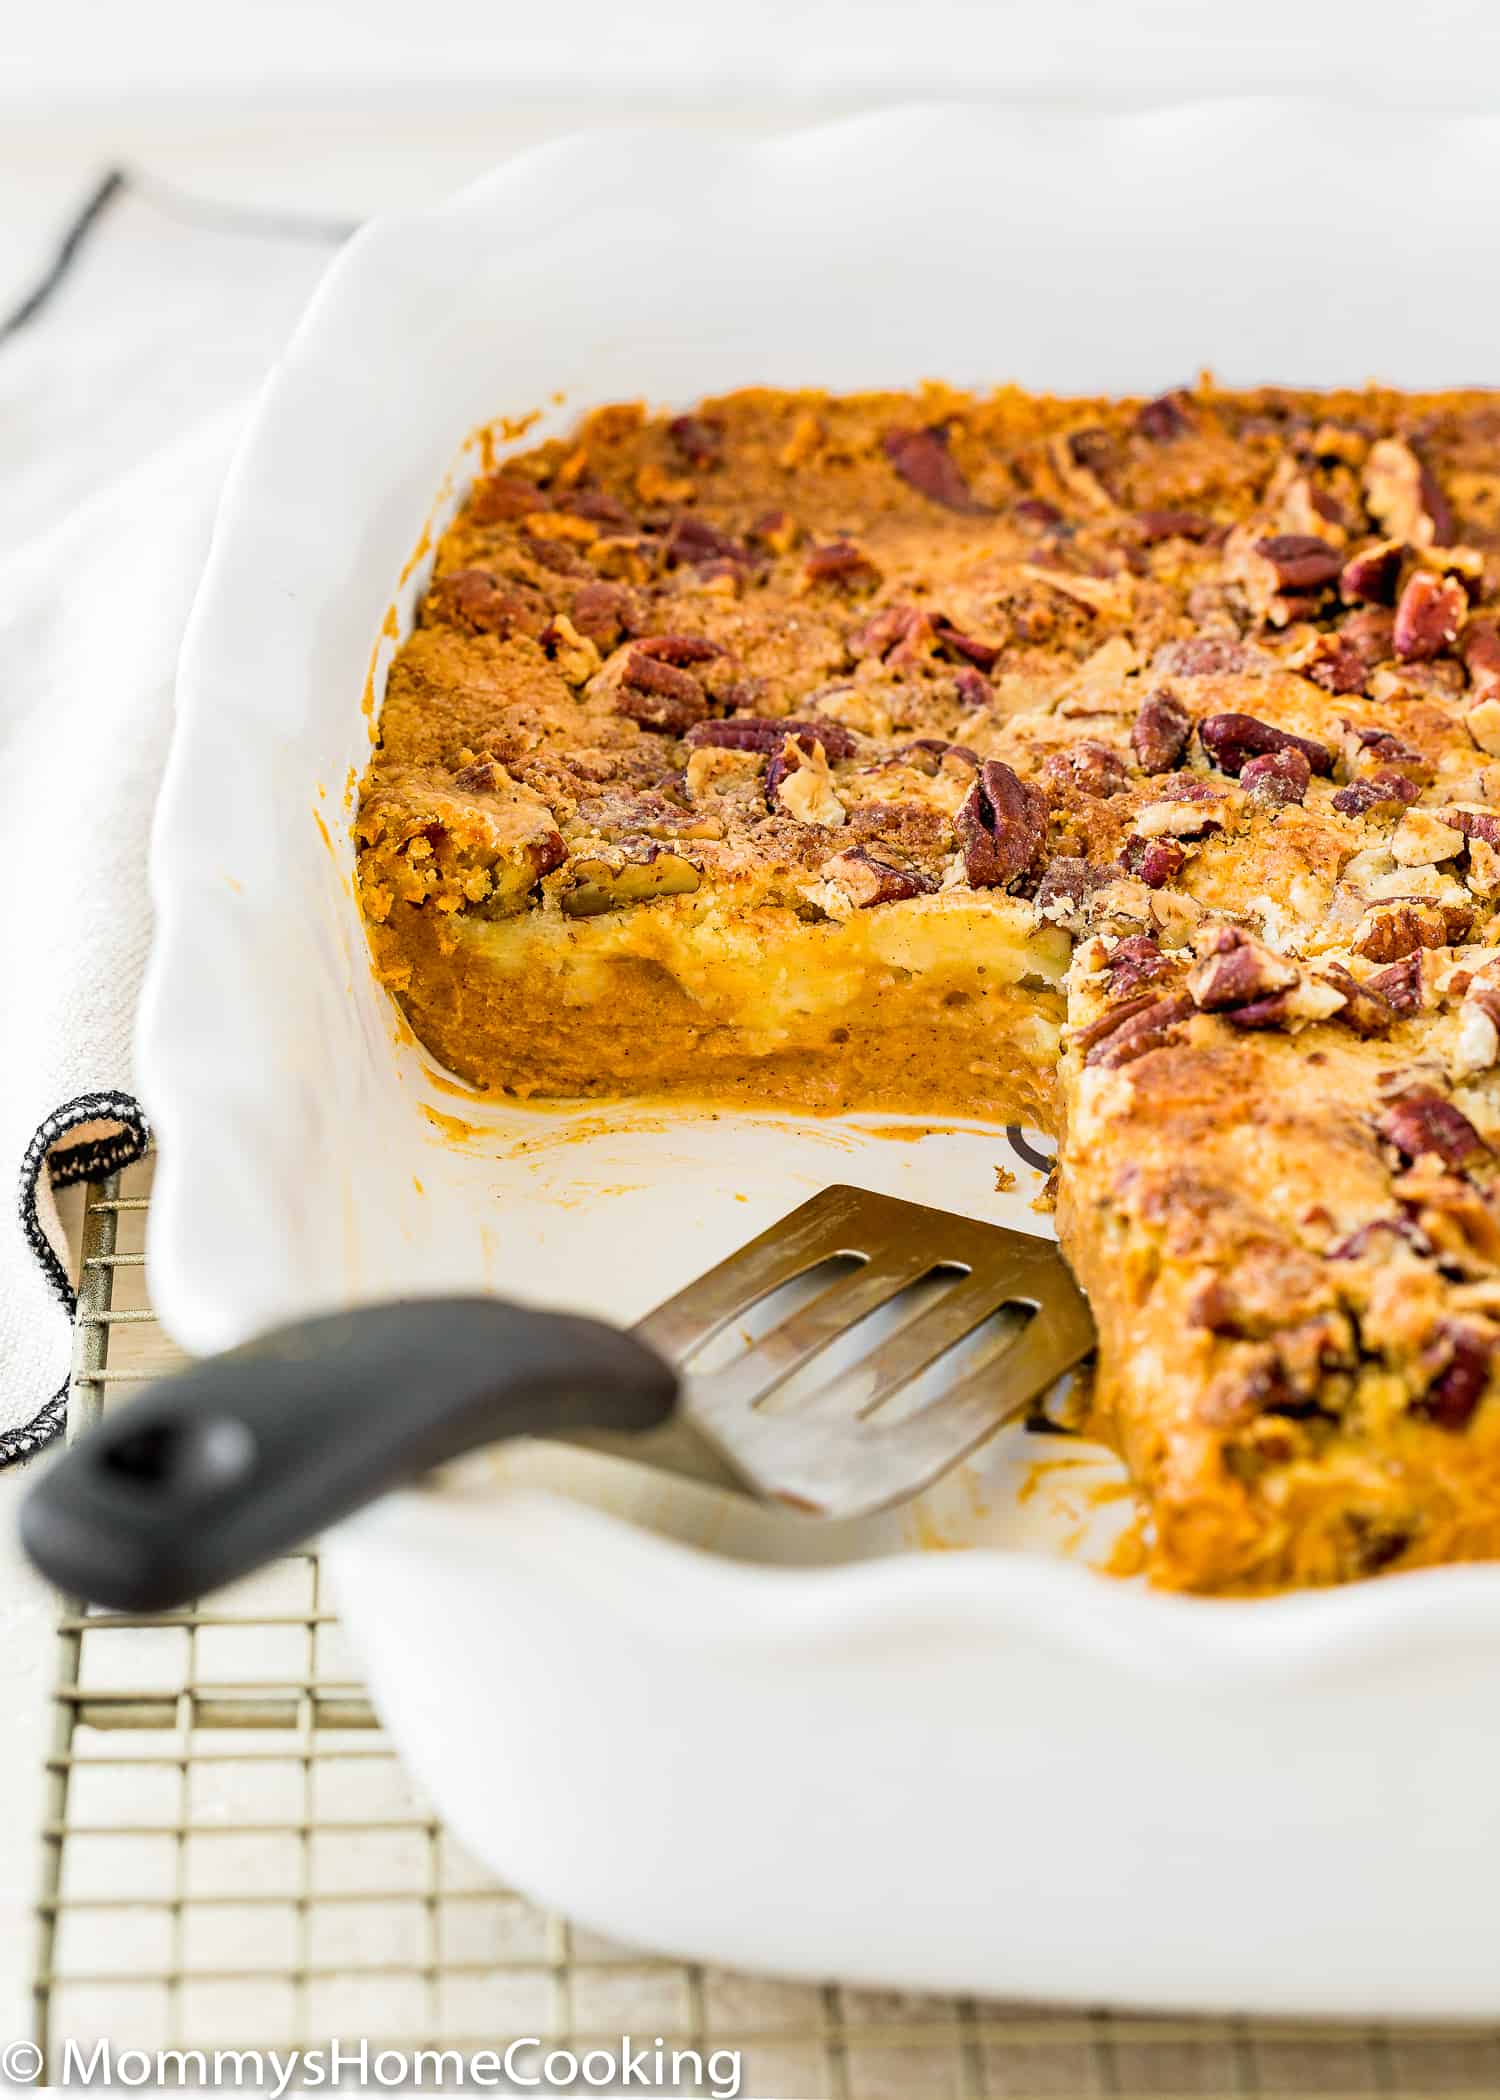 Egg-Free Pumpkin Dump Cake in a baking dish with a serving spatula.